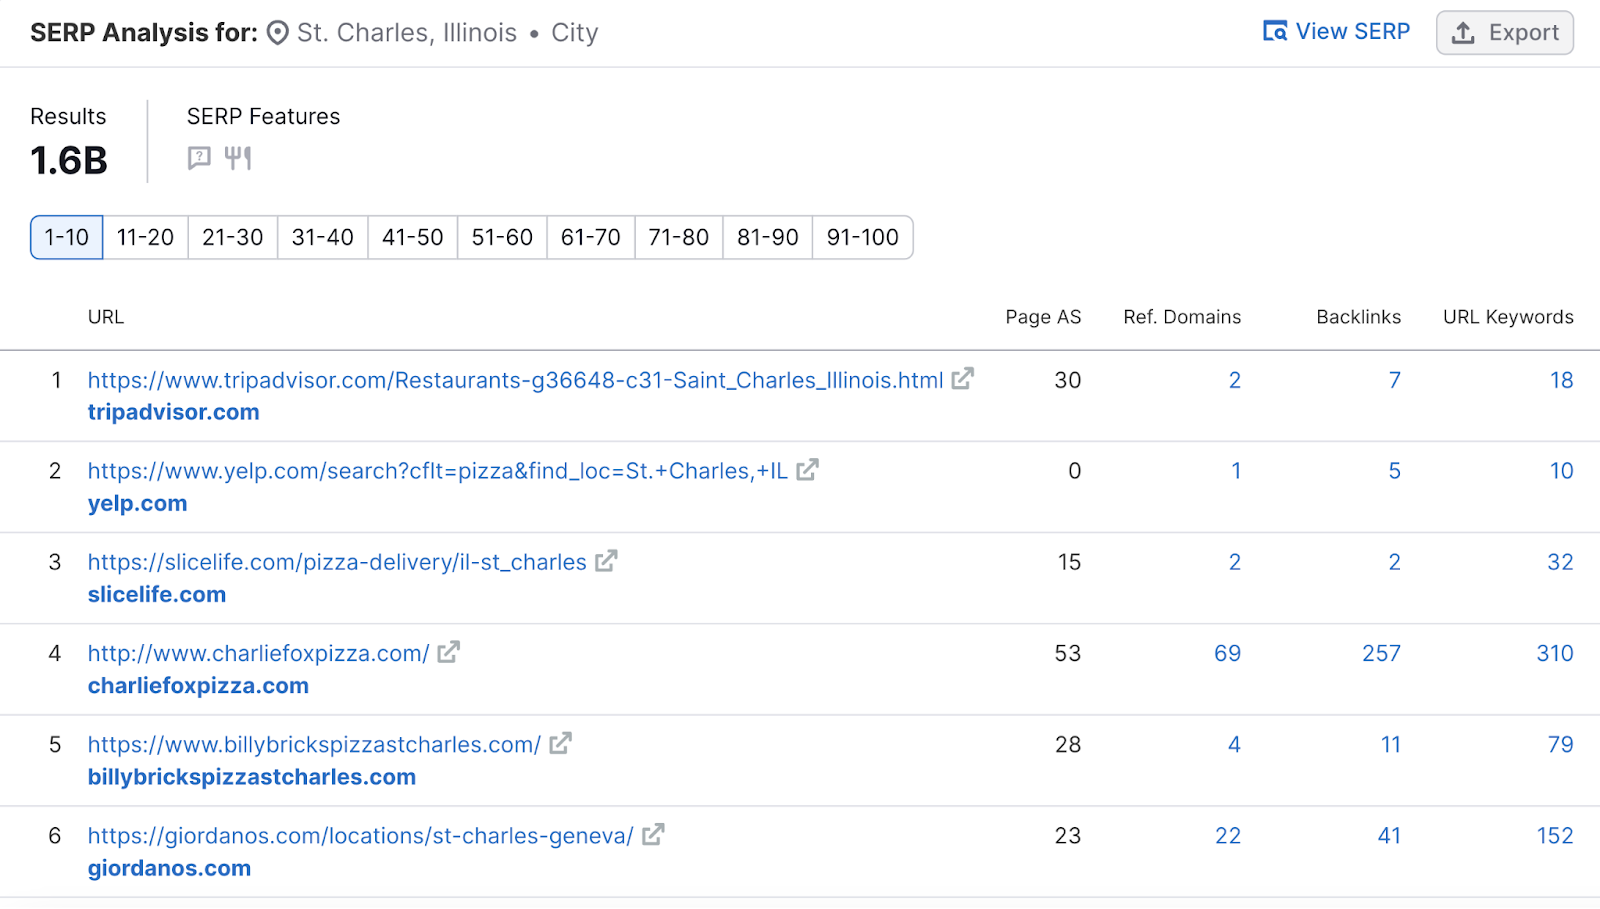 "SERP analysis for St. Charles, Illinois" in Keyword Overview tool